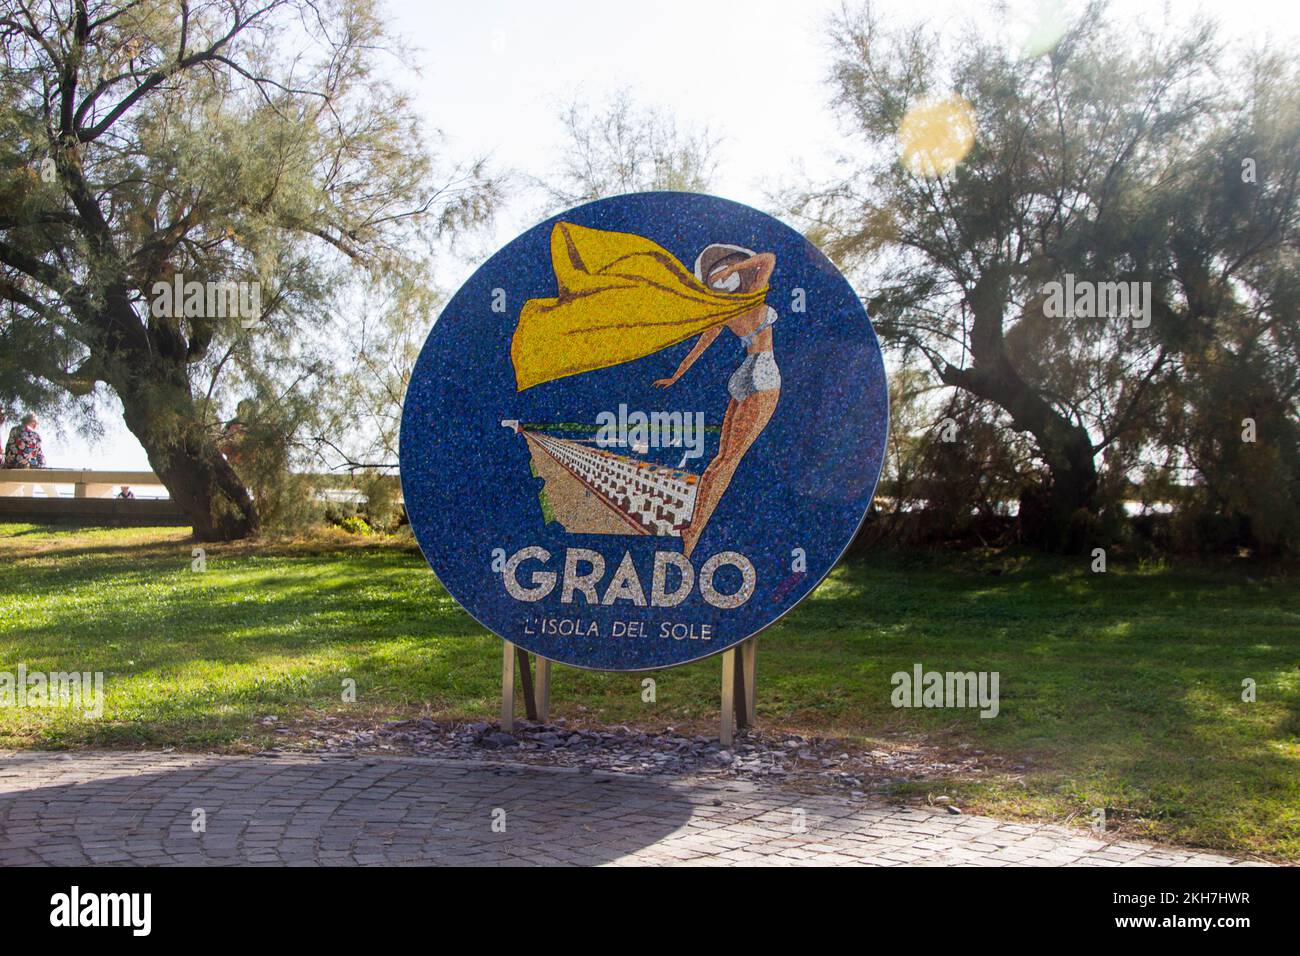 The tourist promotional symbol of town of Grado located at Giardini Palatucci park just outside the beach and town center Stock Photo